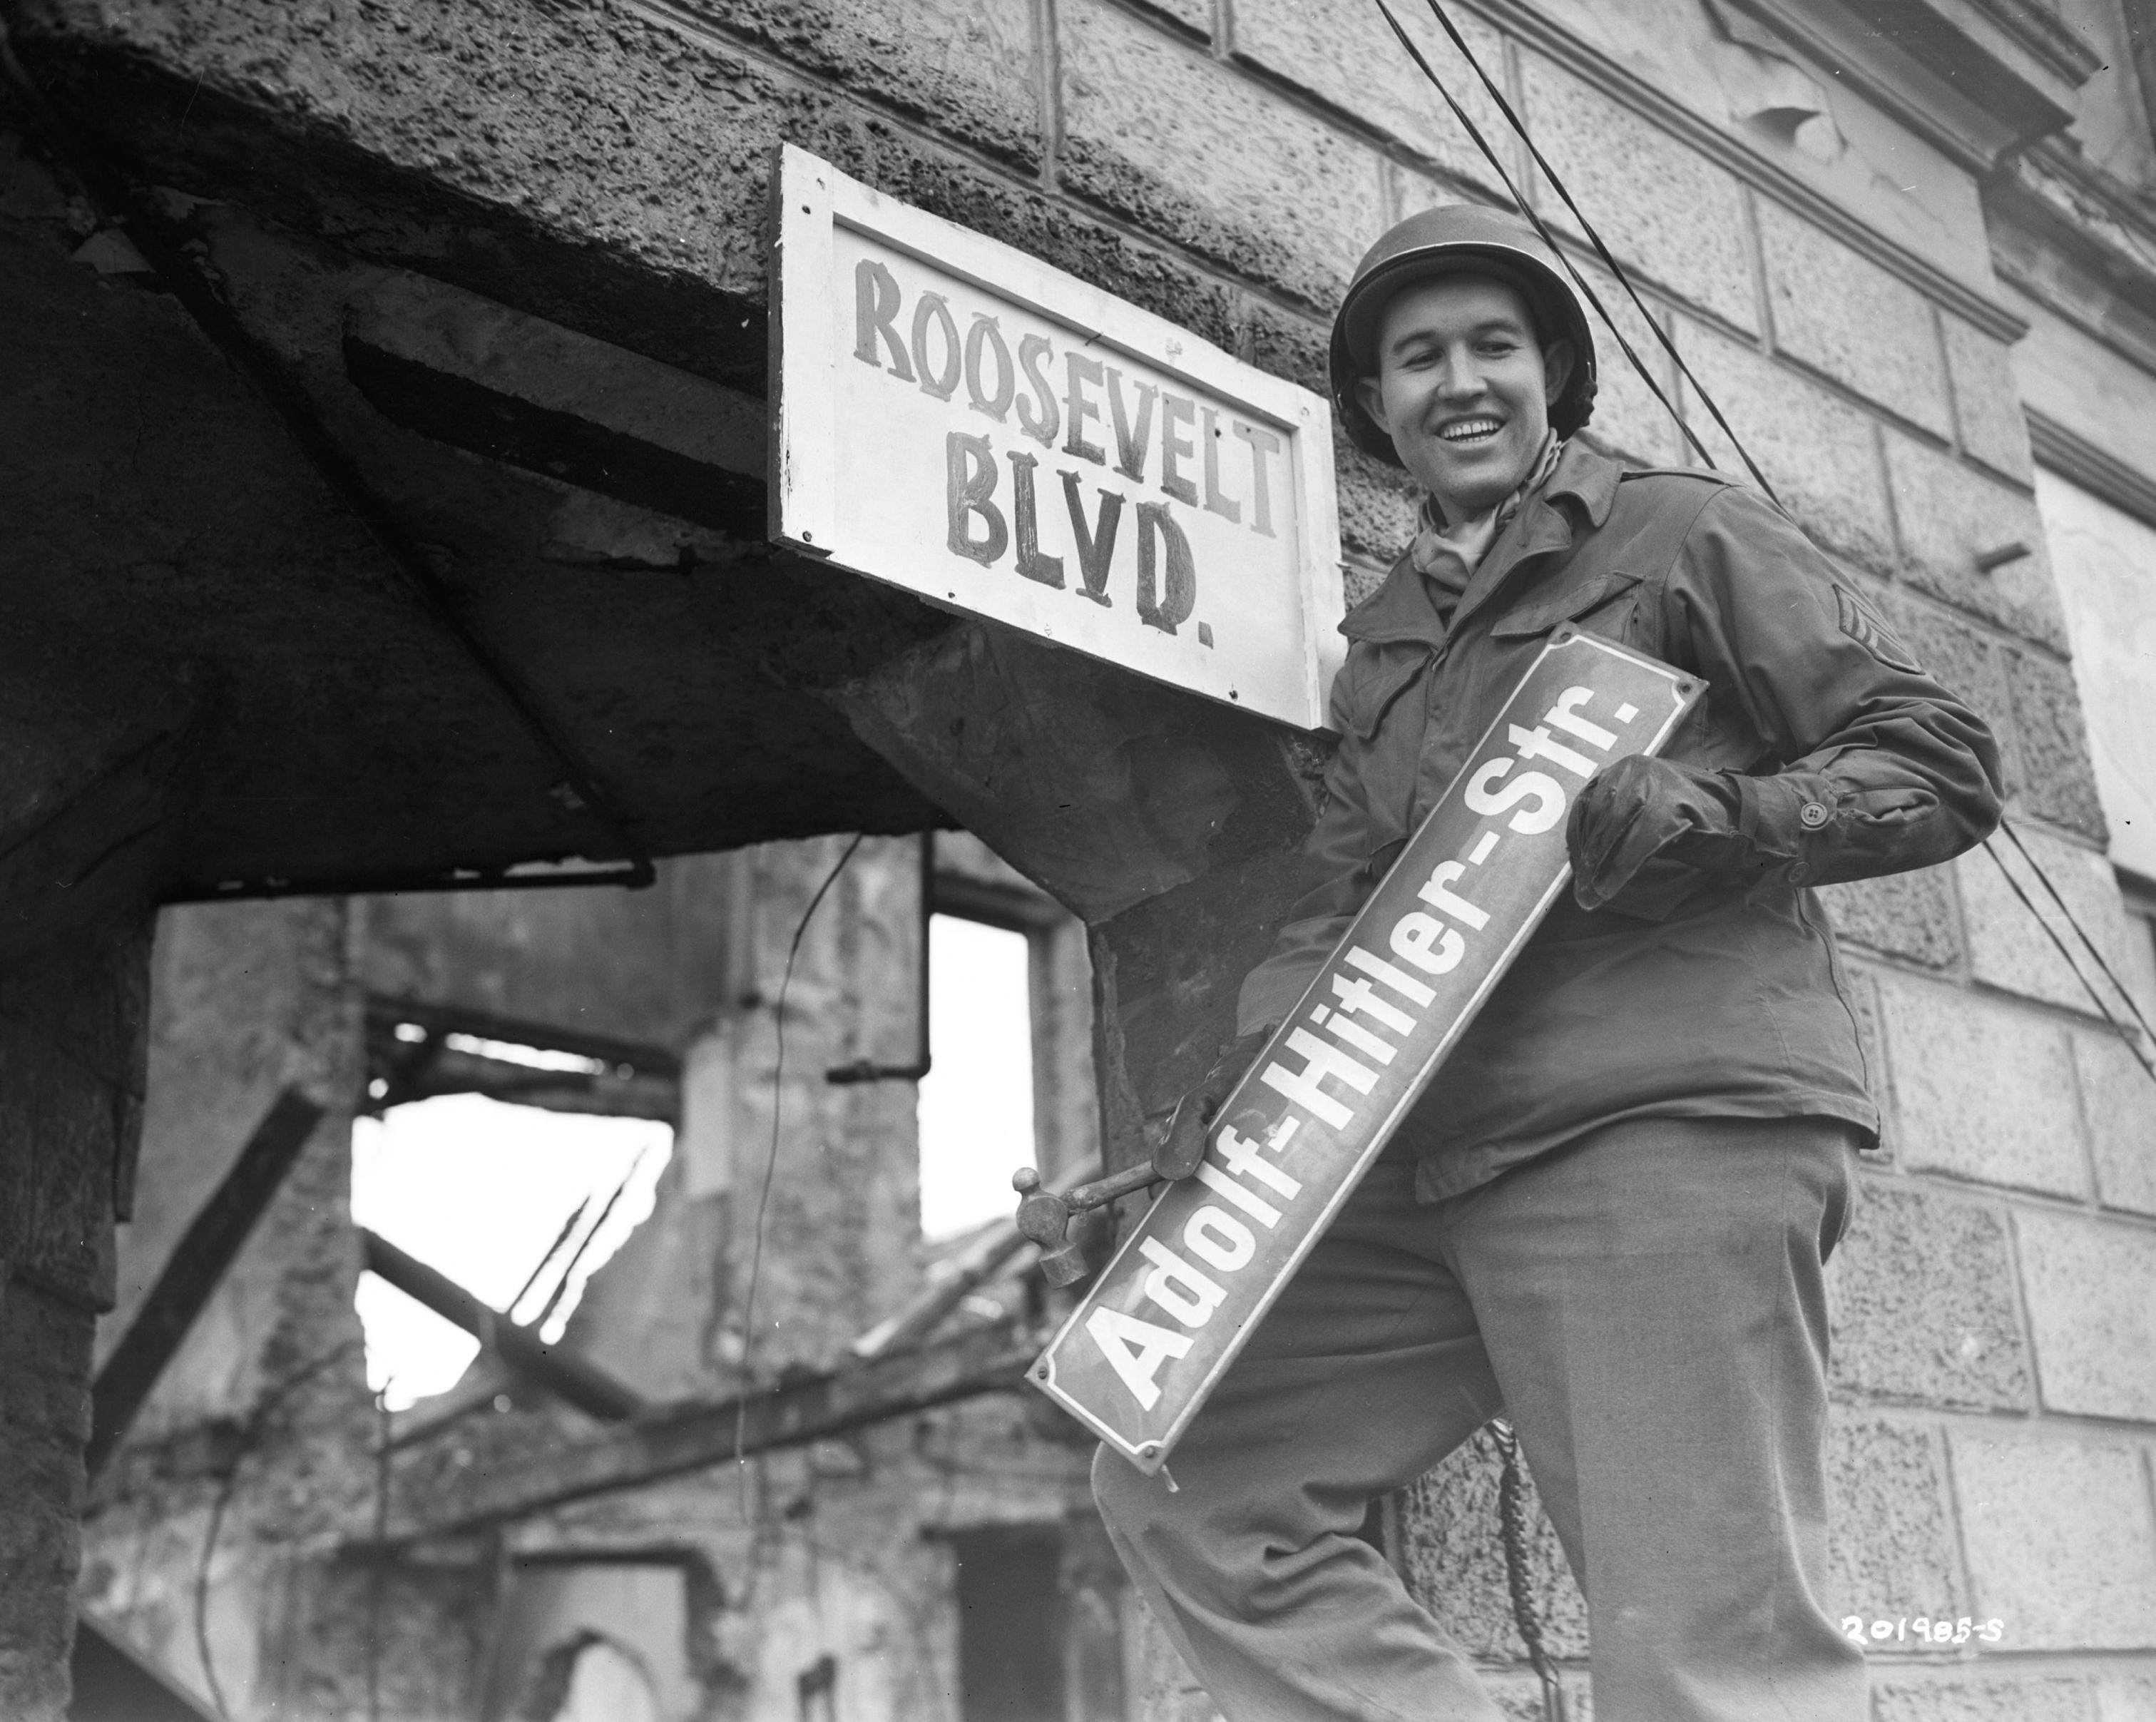 American soldier taking down a sign from a street named after Adolf Hitler in 1945